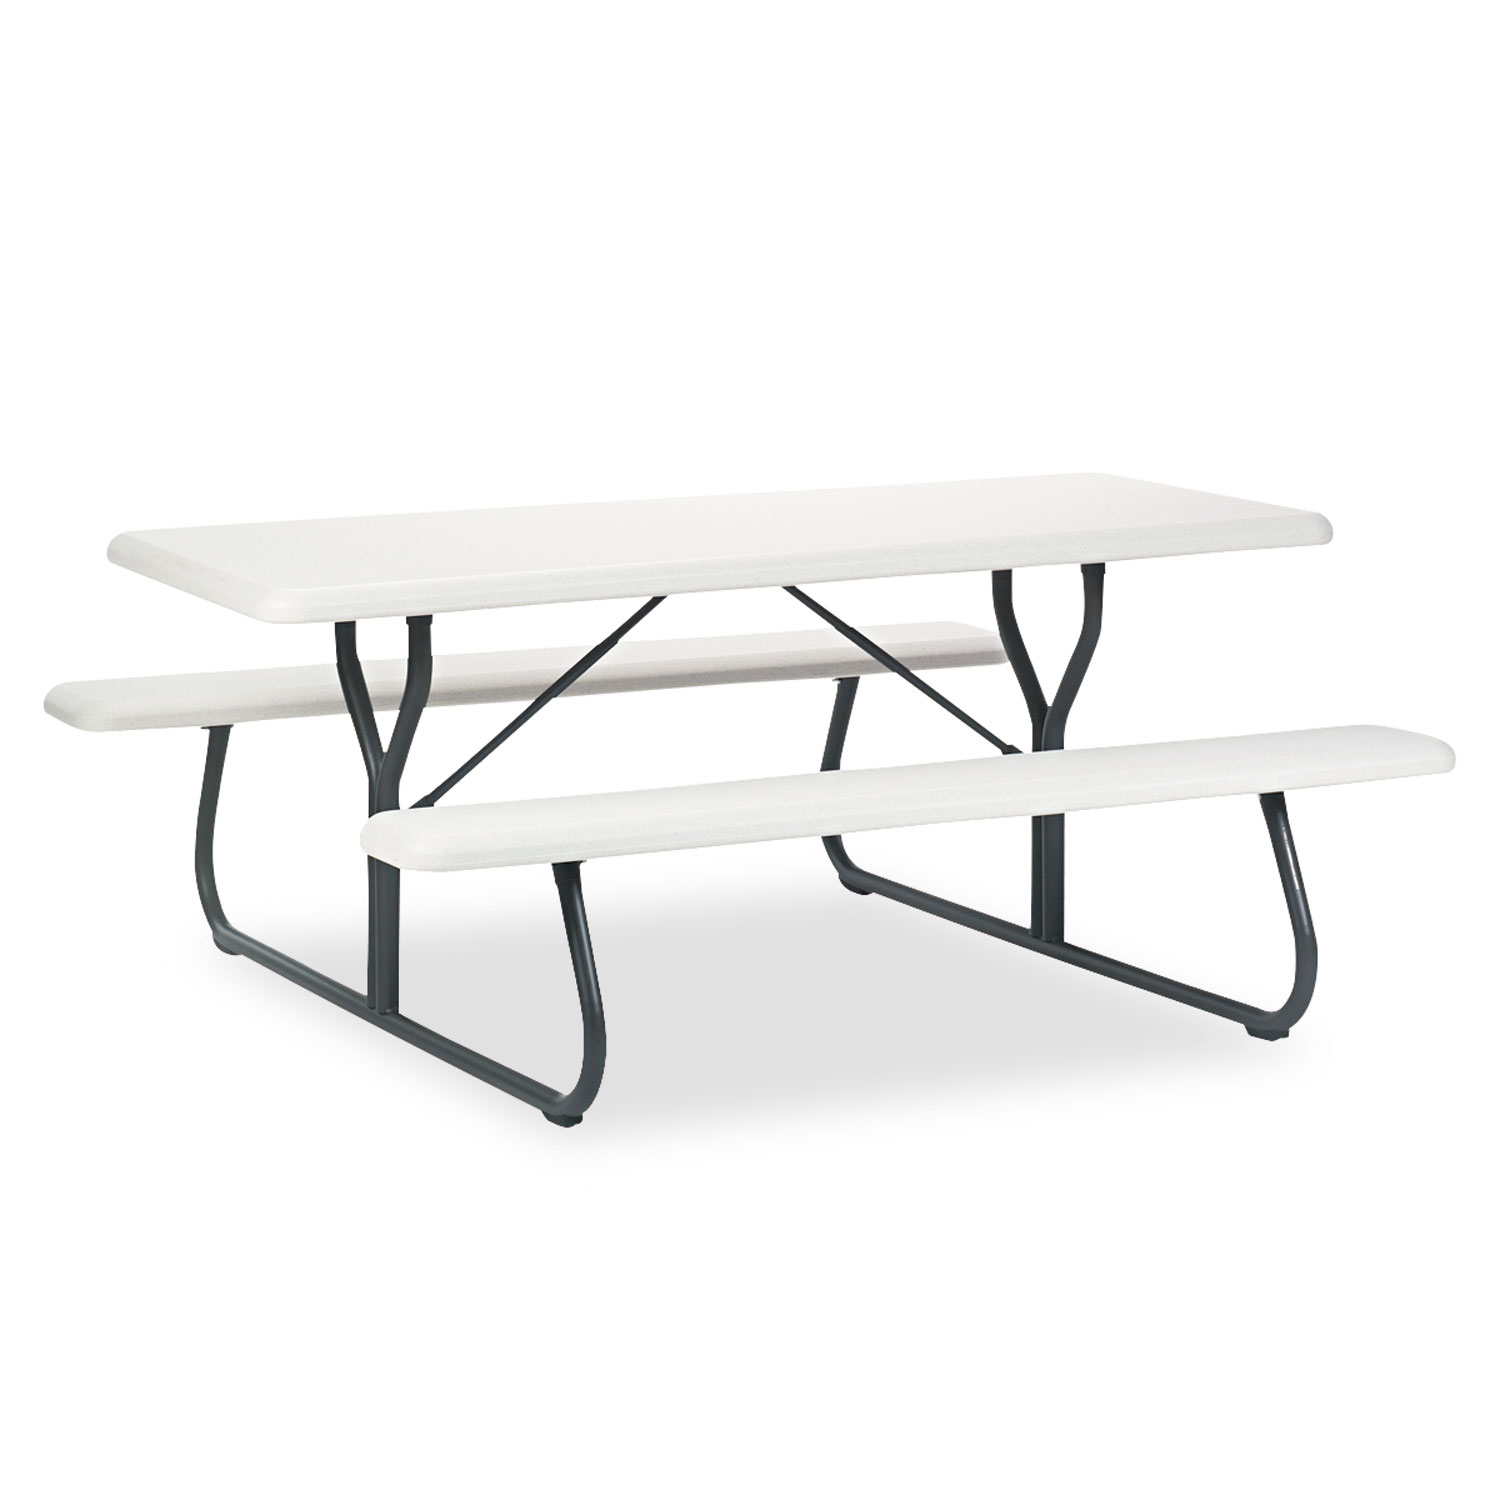  Iceberg 65923 IndestrucTables Too 1200 Series Resin Picnic Table, 72w x 30d, Platinum/Gray (ICE65923) 